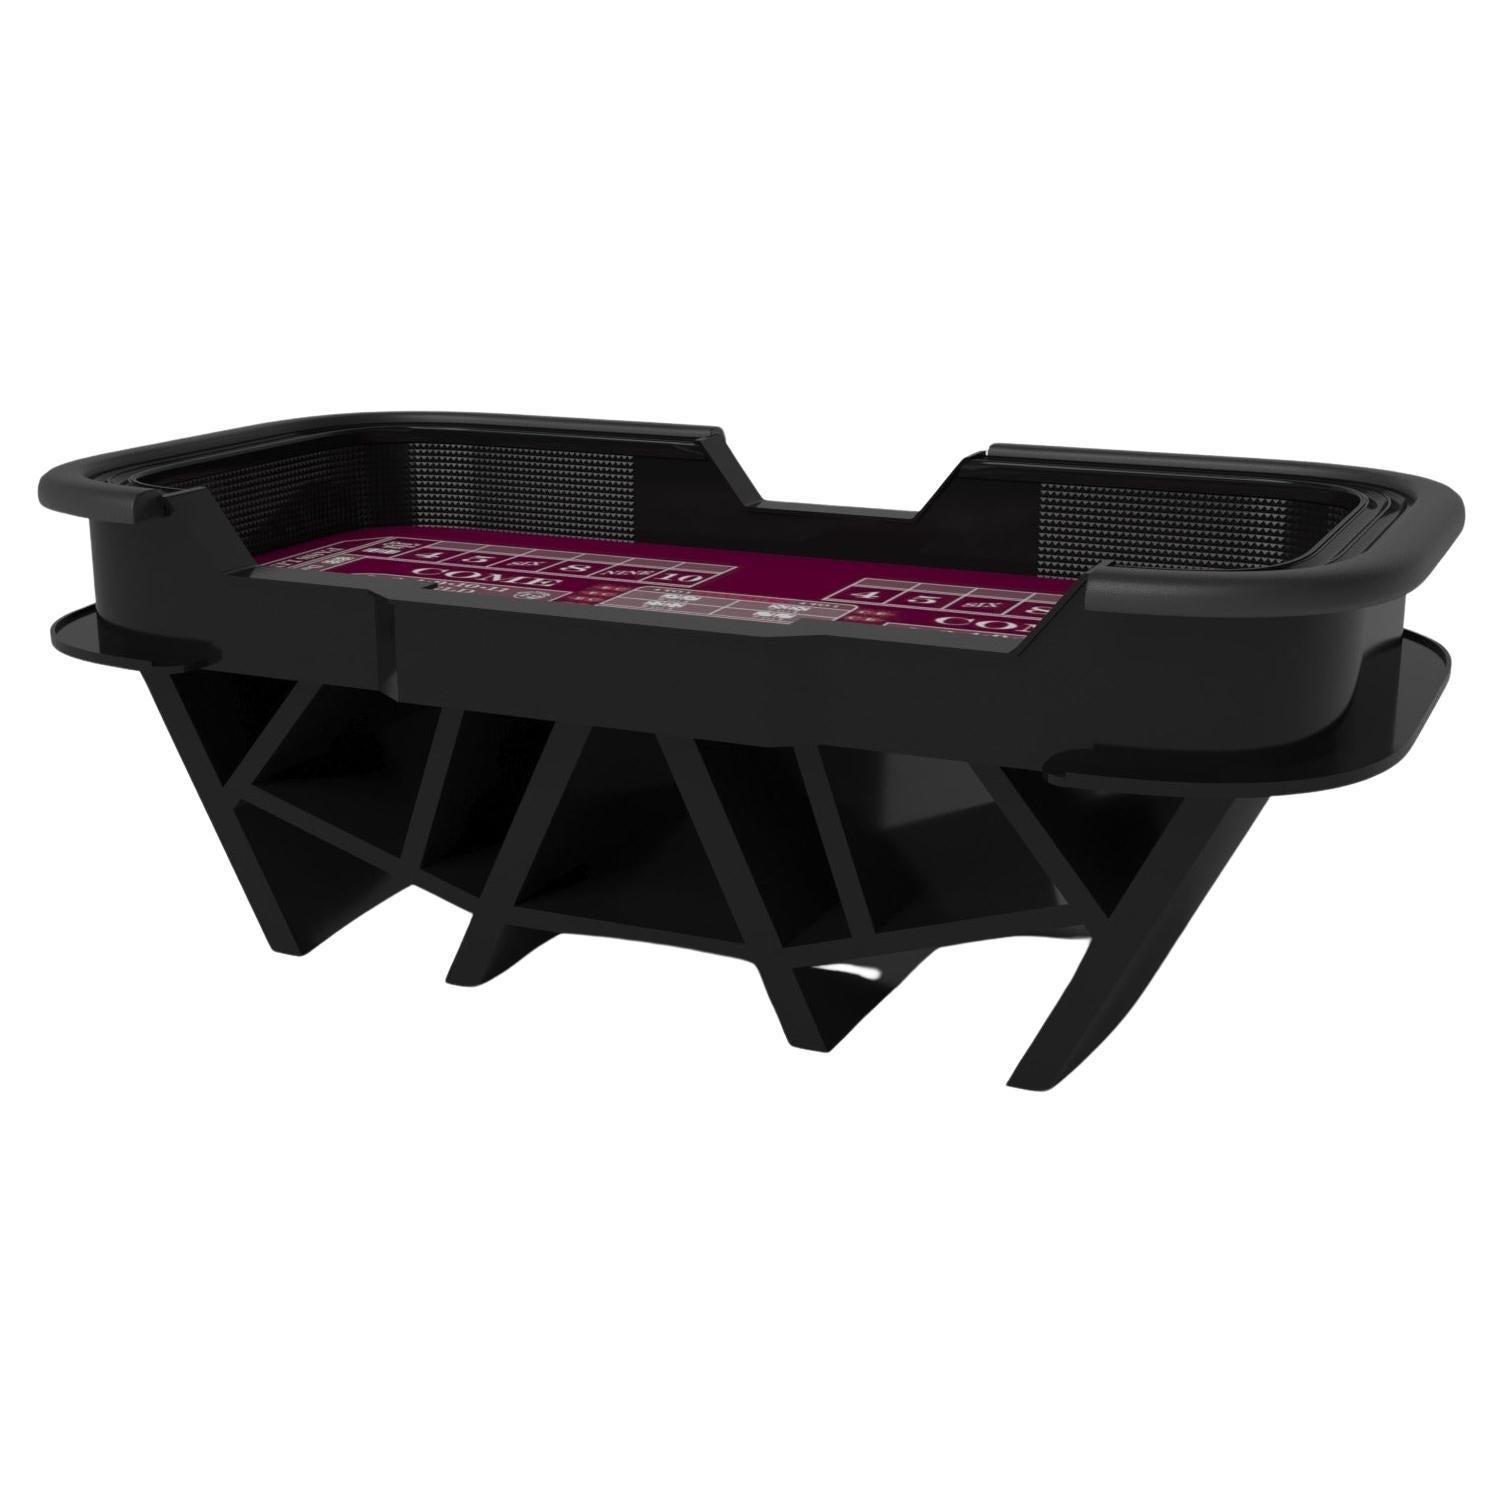 Elevate Customs tables Maze Craps/Solid Pantone Black Color in 9'9" -Made in USA